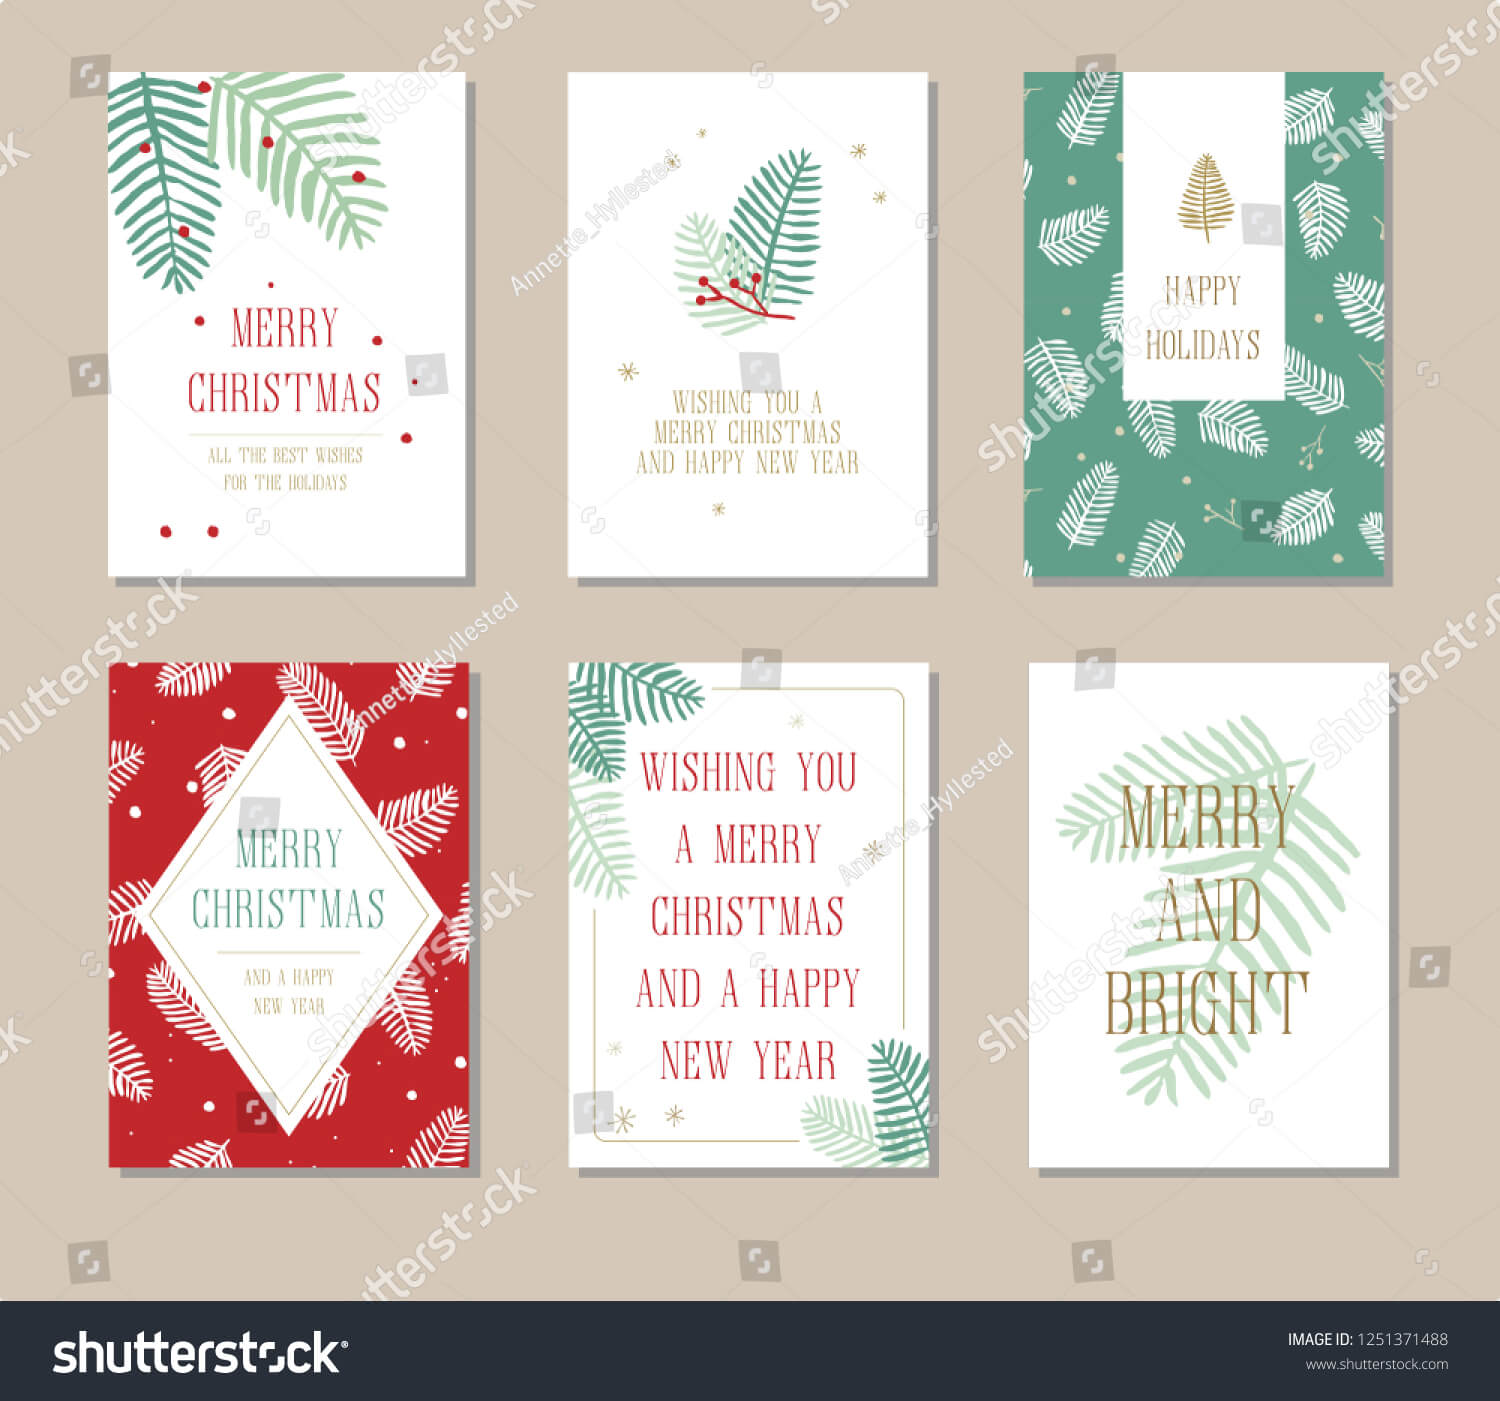 Holiday Greeting Card Set Christmas Designs Stock Vector In Print Your Own Christmas Cards Templates